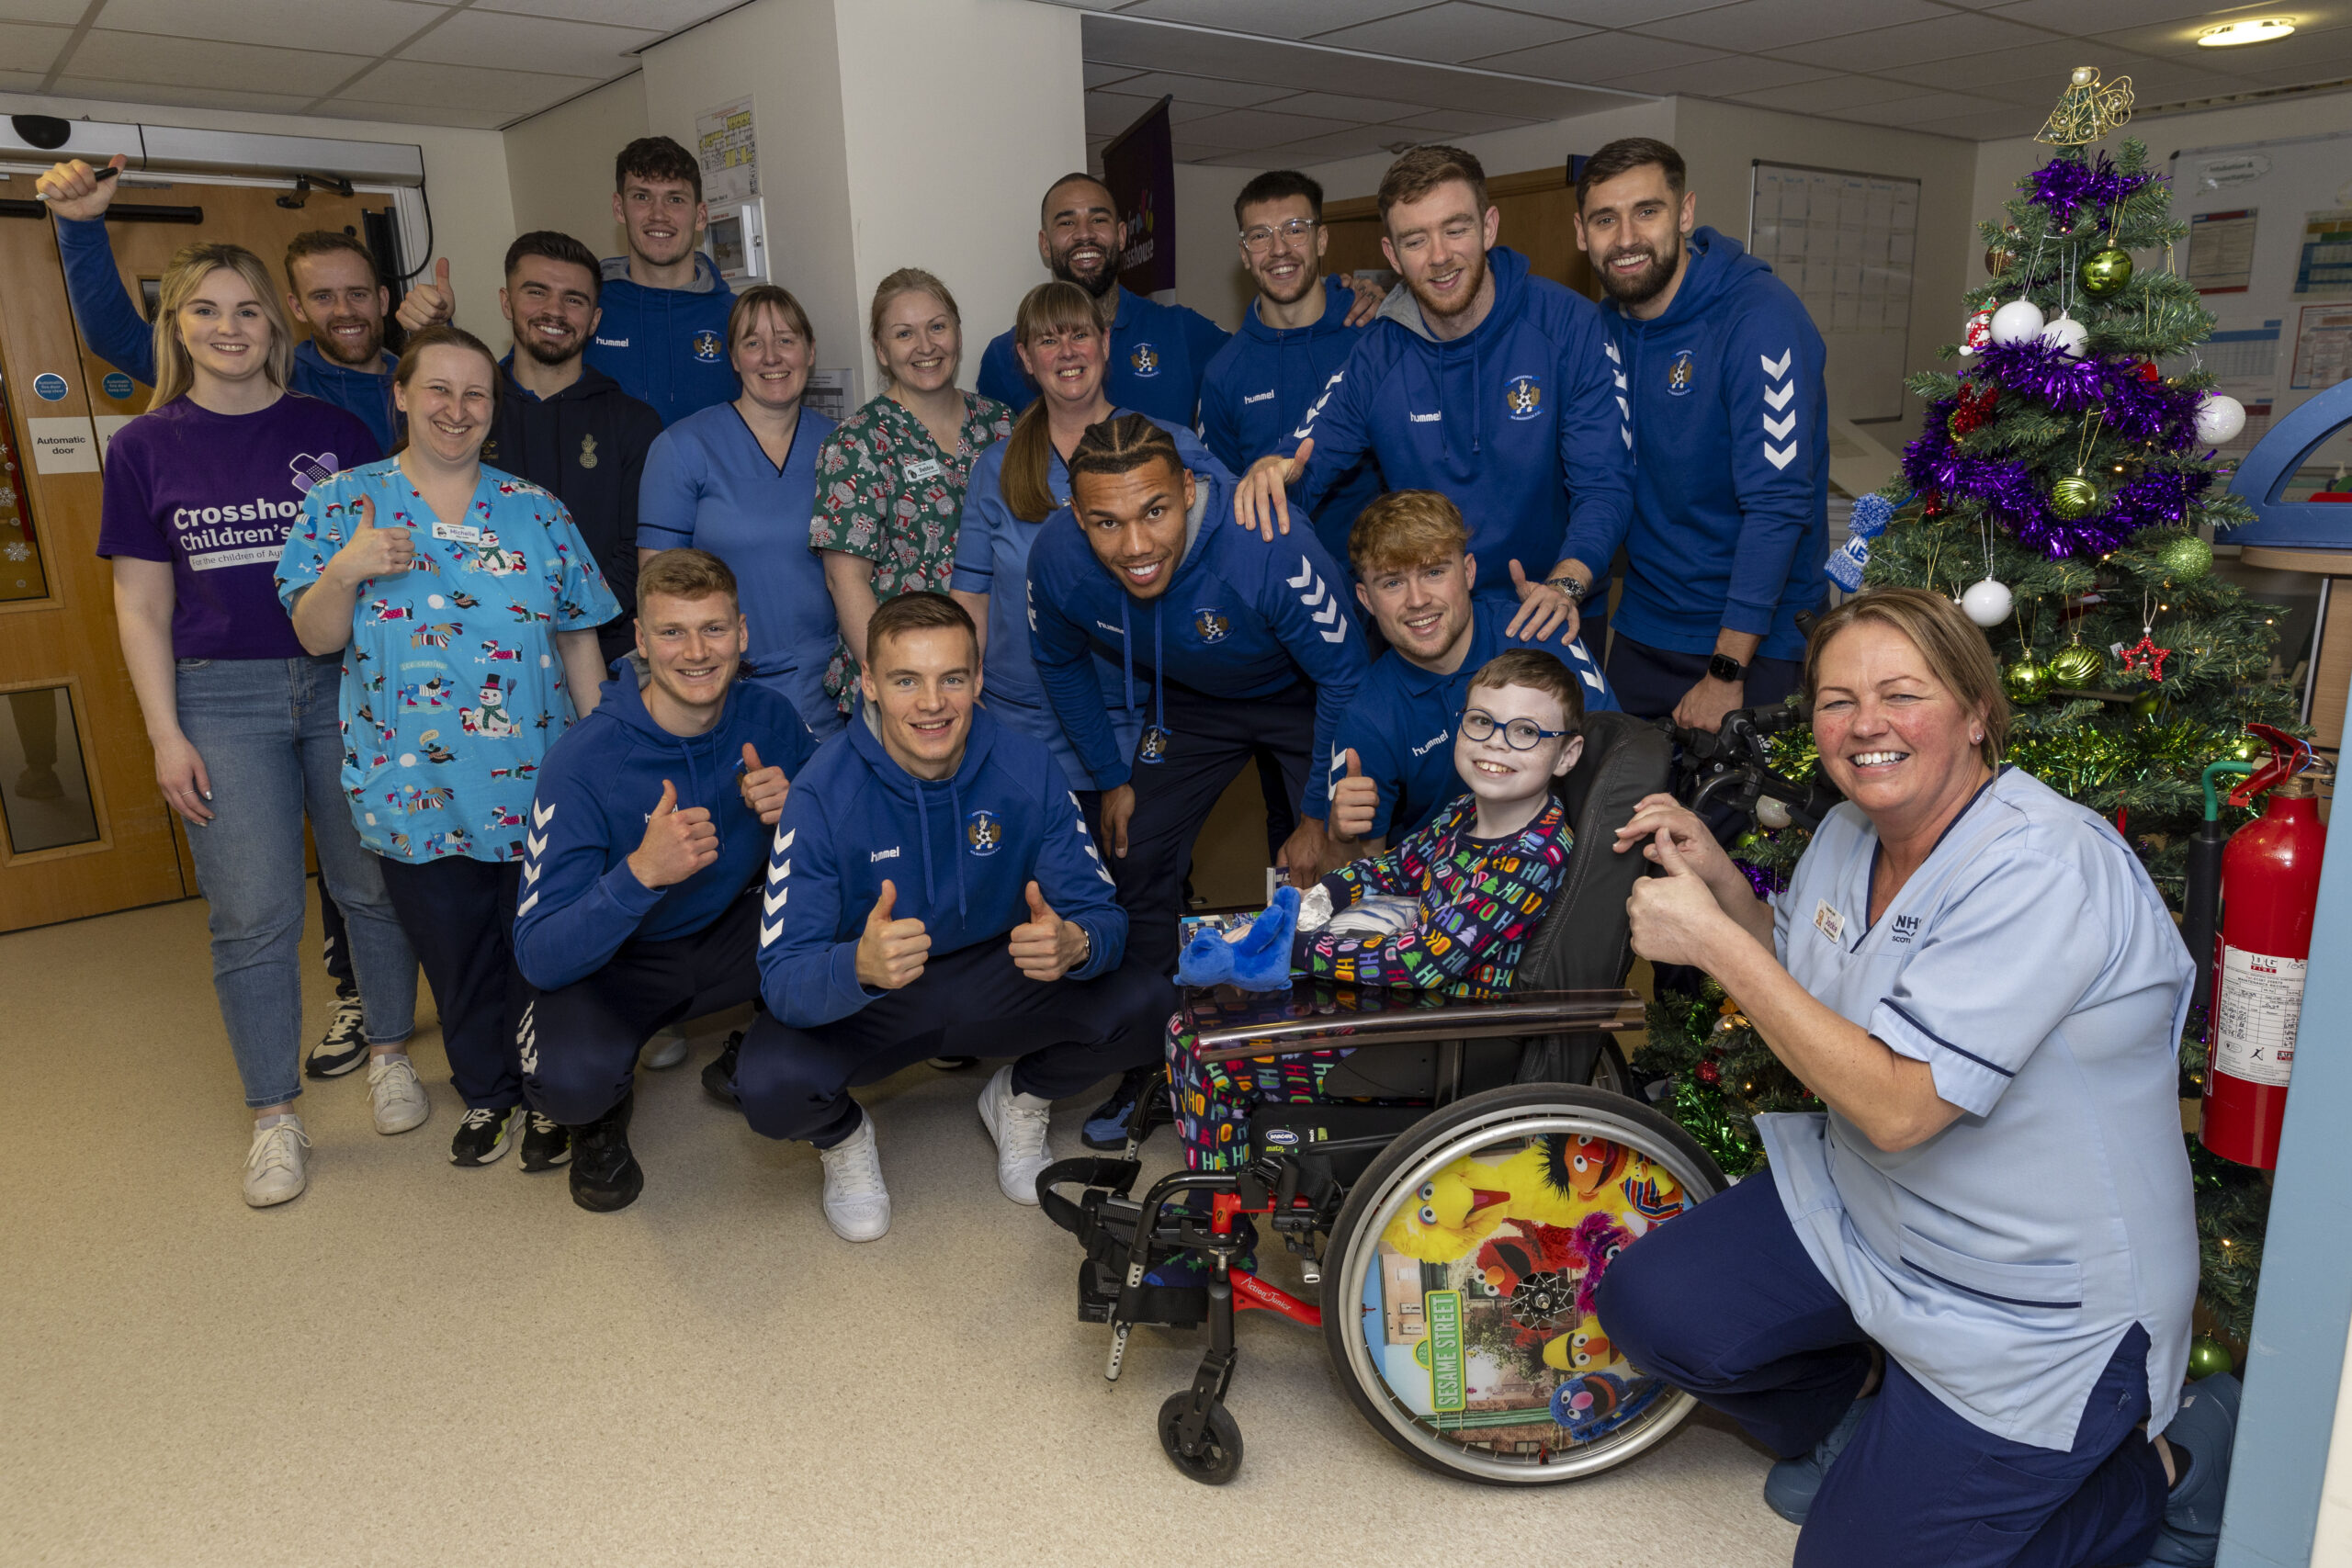 Players from Kilmarnock Football club for a festive visit to Children's Ward